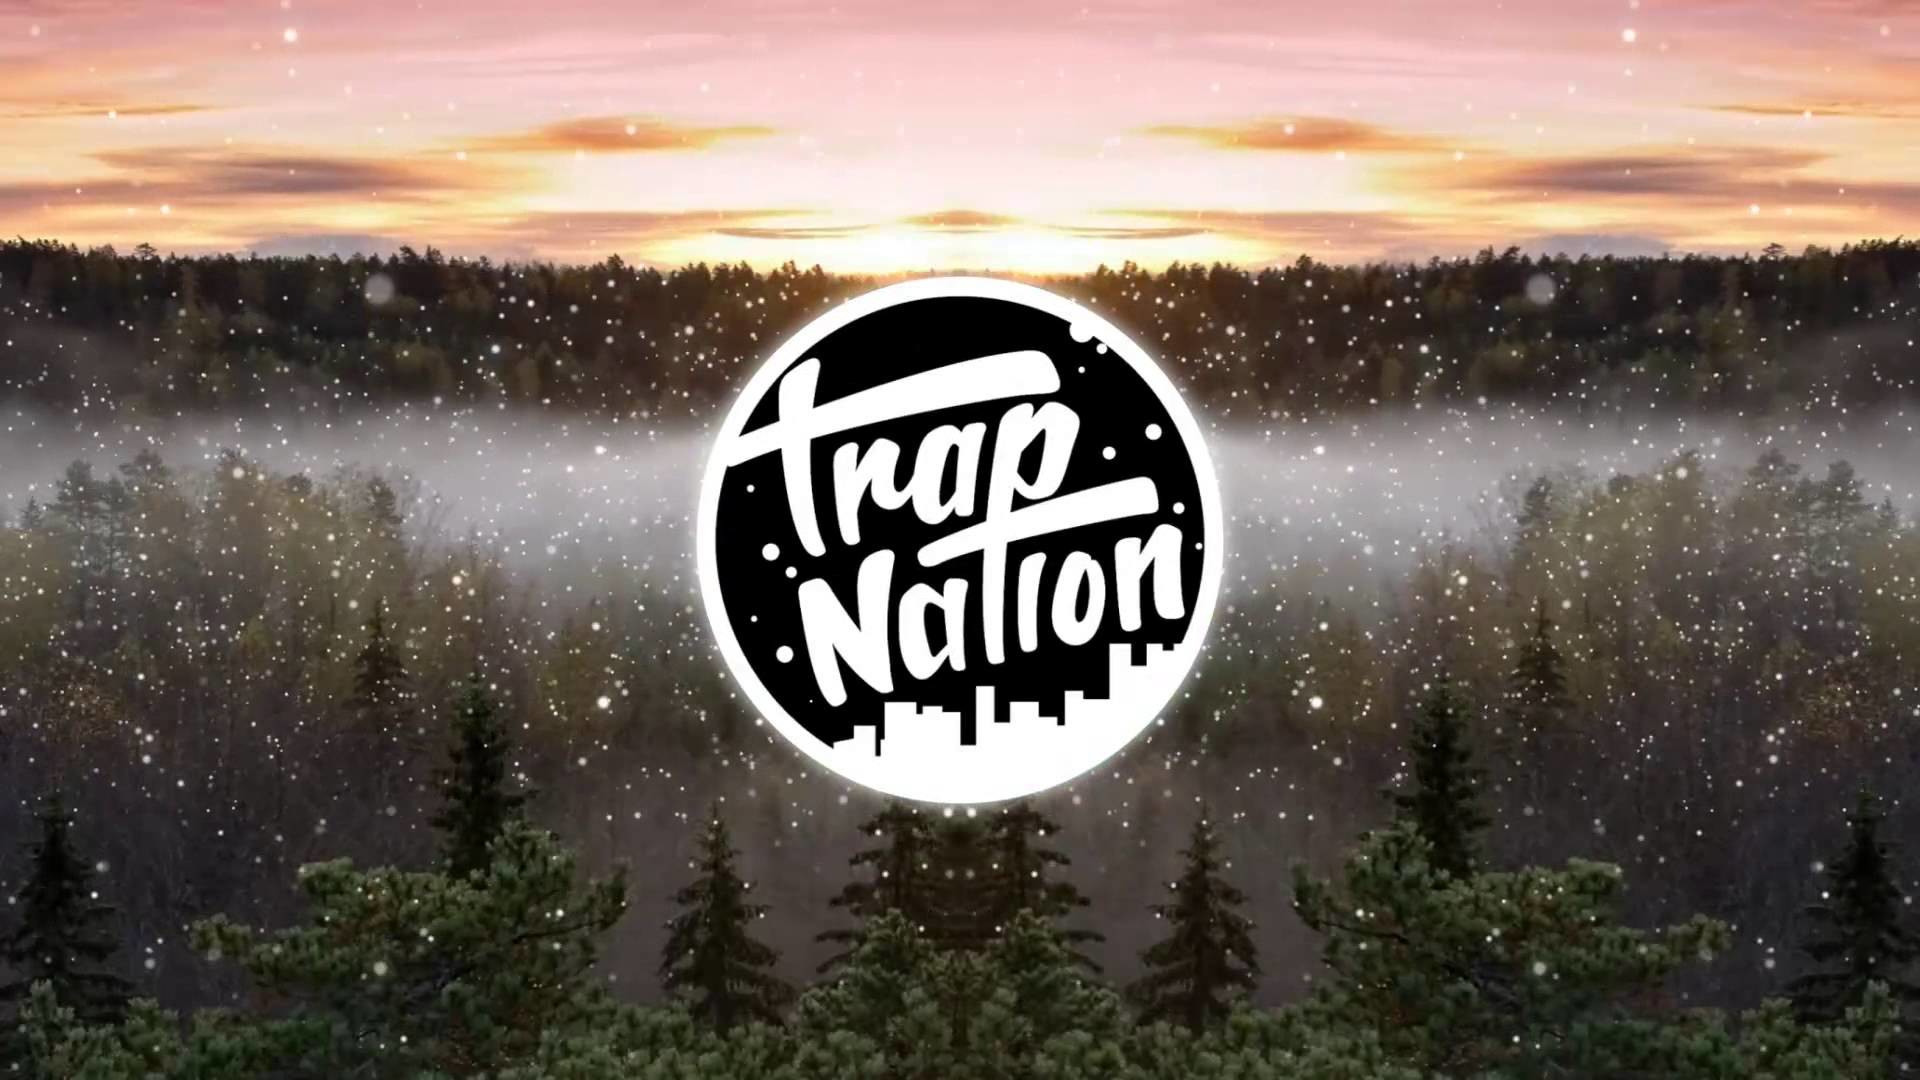 1920x1080 Images of Trap Nation Wallpaper Honey - #SC ...